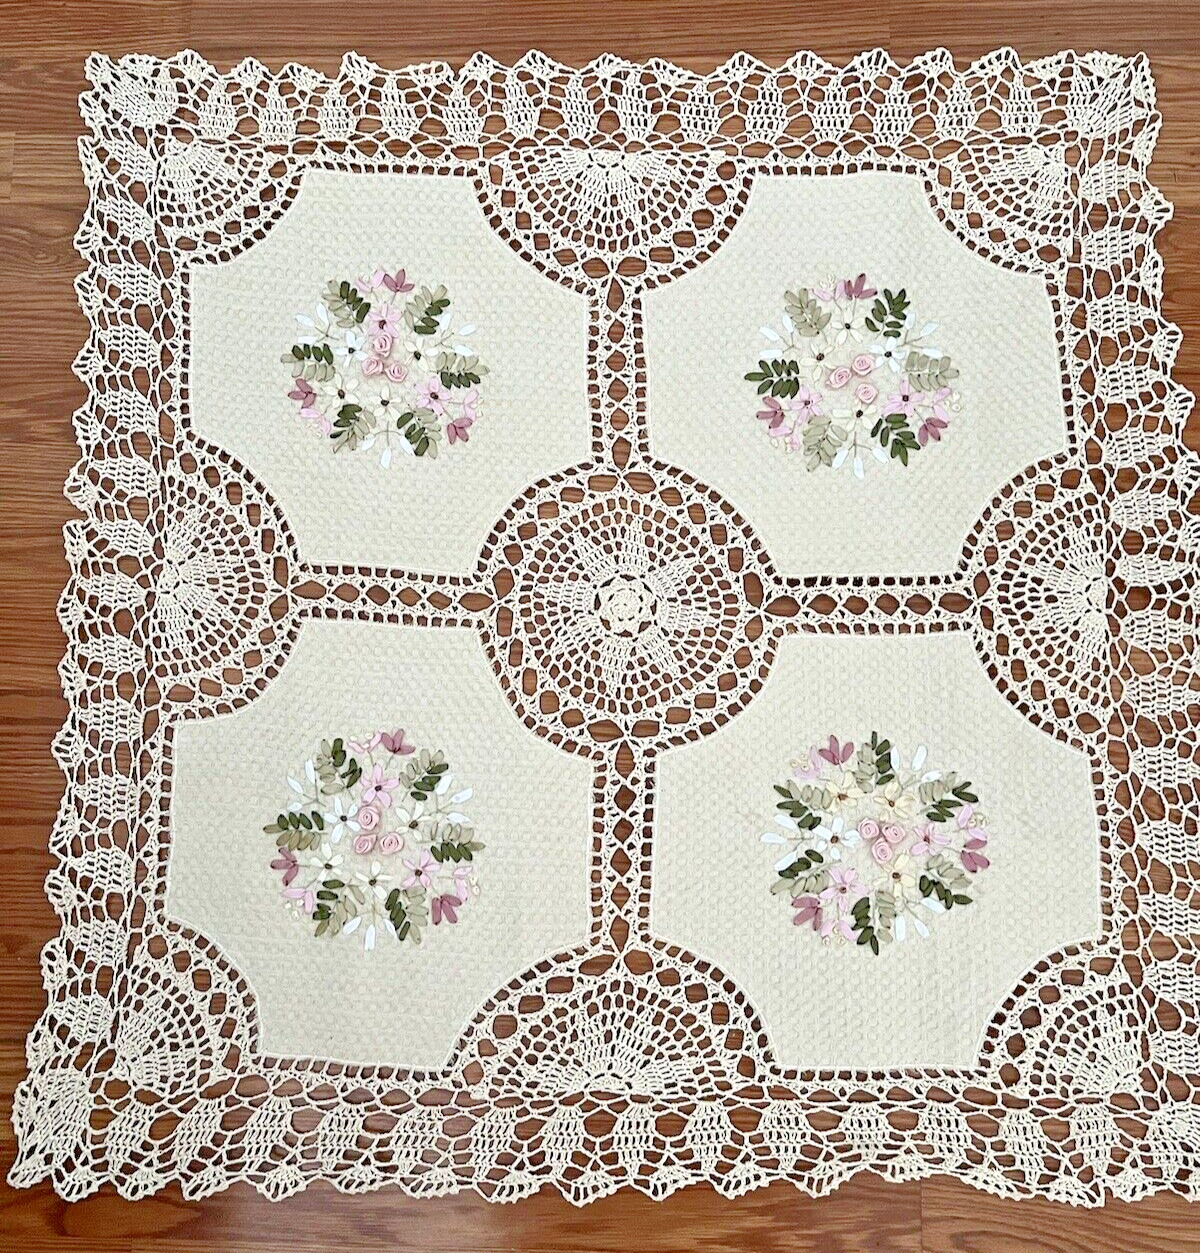 Vintage Victorian Style Handmade Square Table Cloth/Cover Floral Pattern